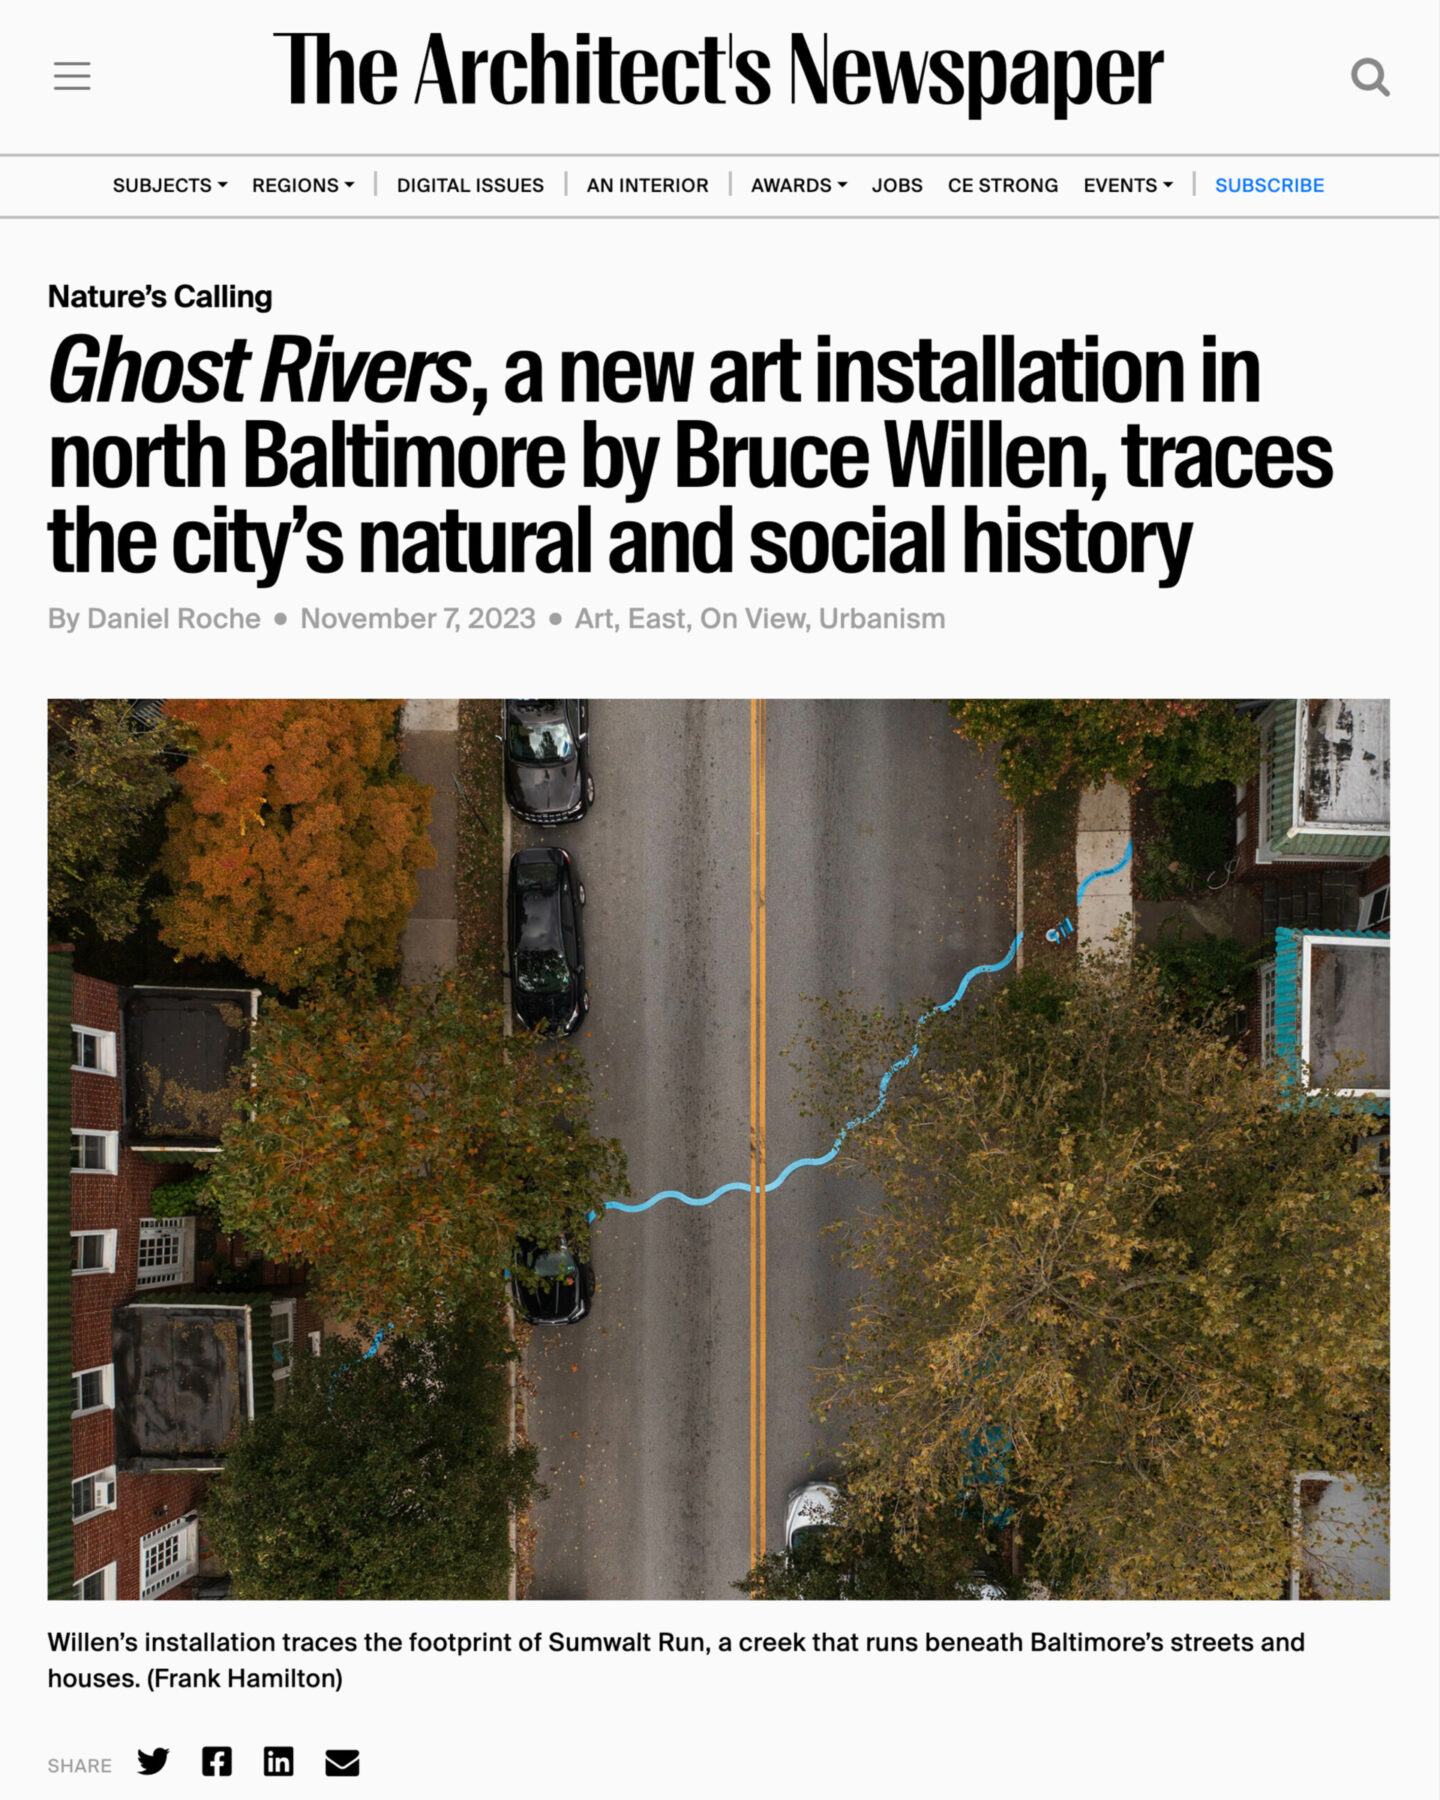 The Architects Newspaper feature article on Ghost Rivers — Ghost Rivers, a new art installation in north Baltimore by Bruce Willen, traces the city’s natural and social history